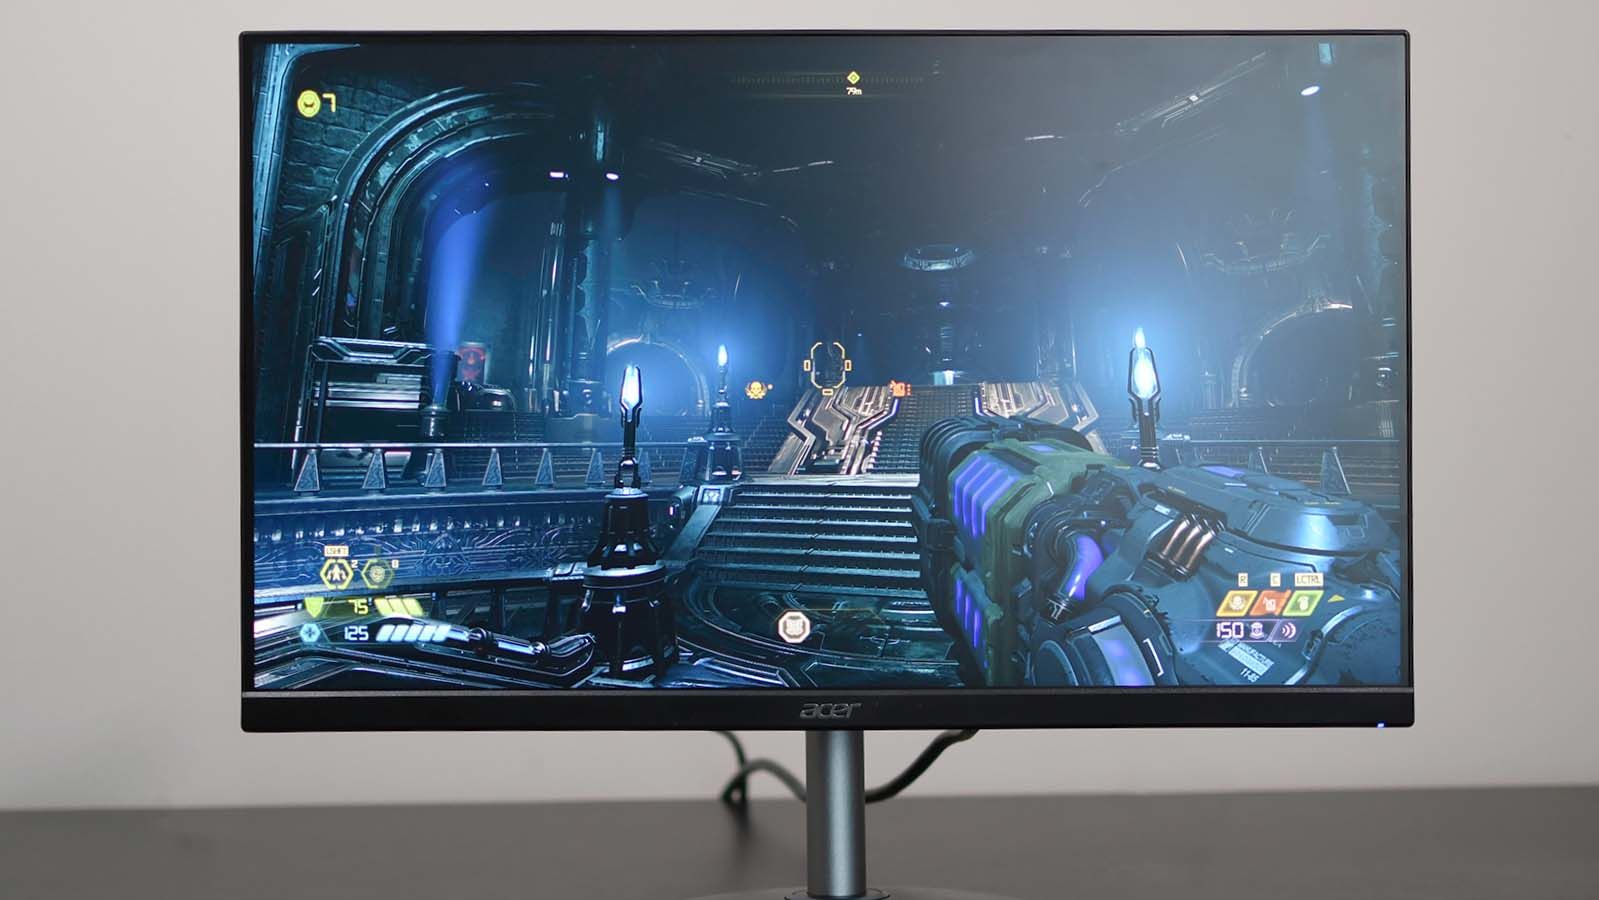 This Black Friday gaming monitor deal takes $220 off one of our